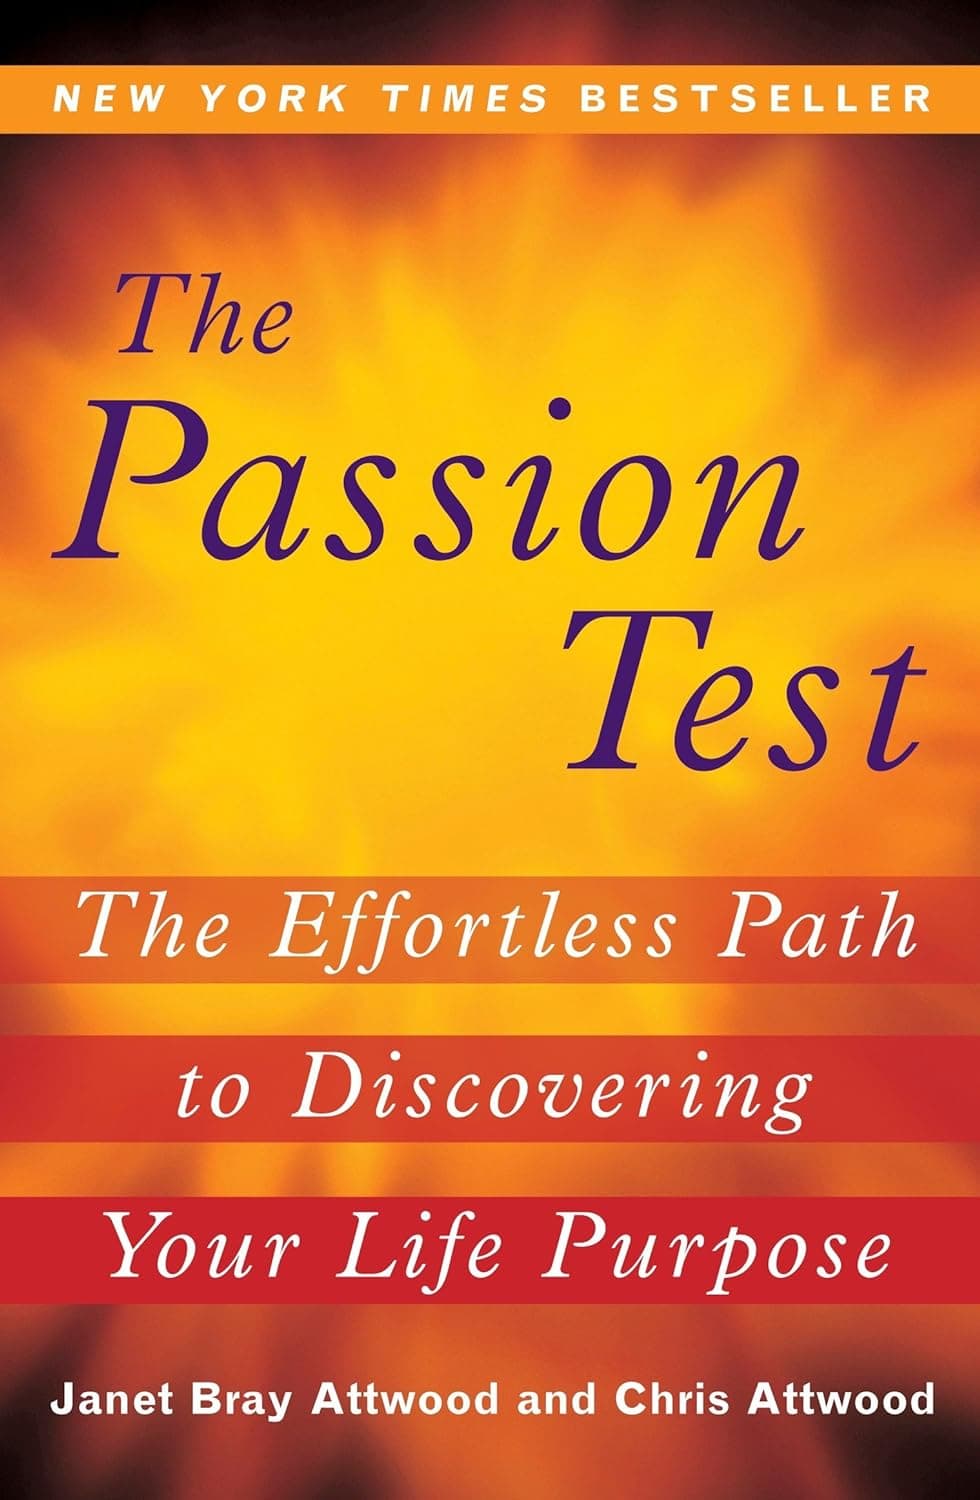 The Passion Test: The Effortless Path to Discovering Your Life Purpose by Janet and Chris Attwood